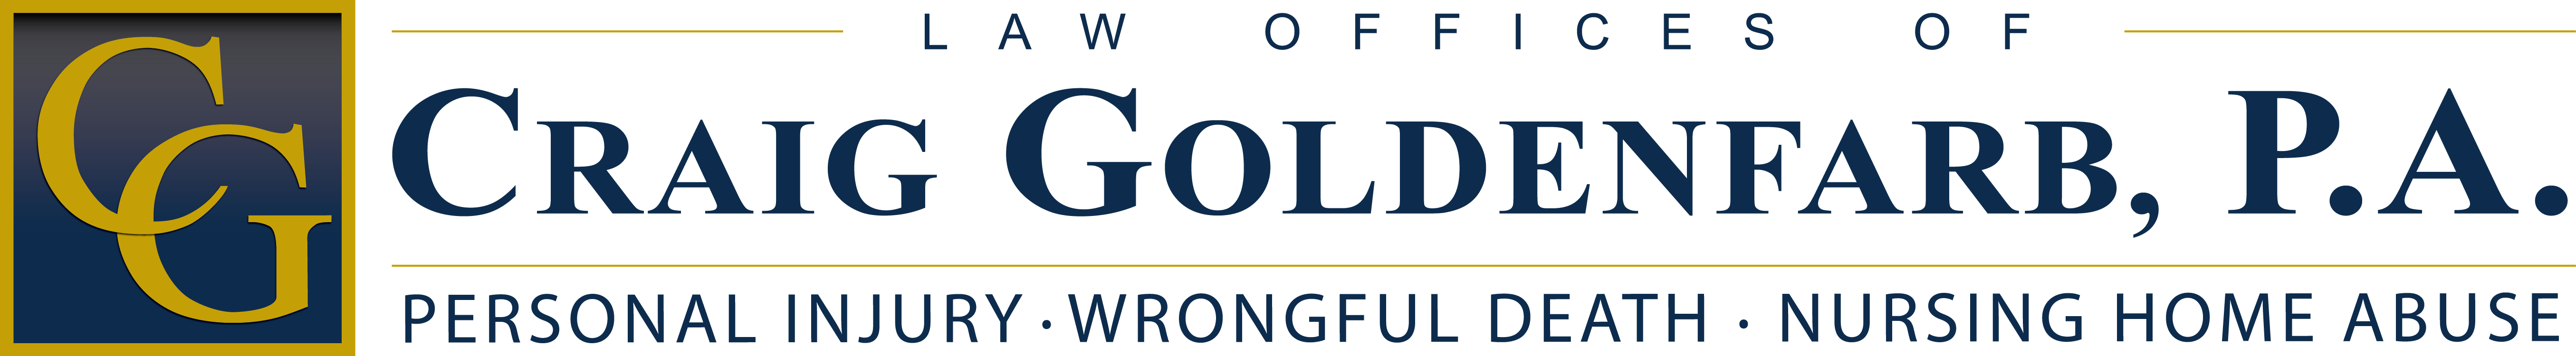 Law Offices of Craig Goldenfarb, P.A. logo